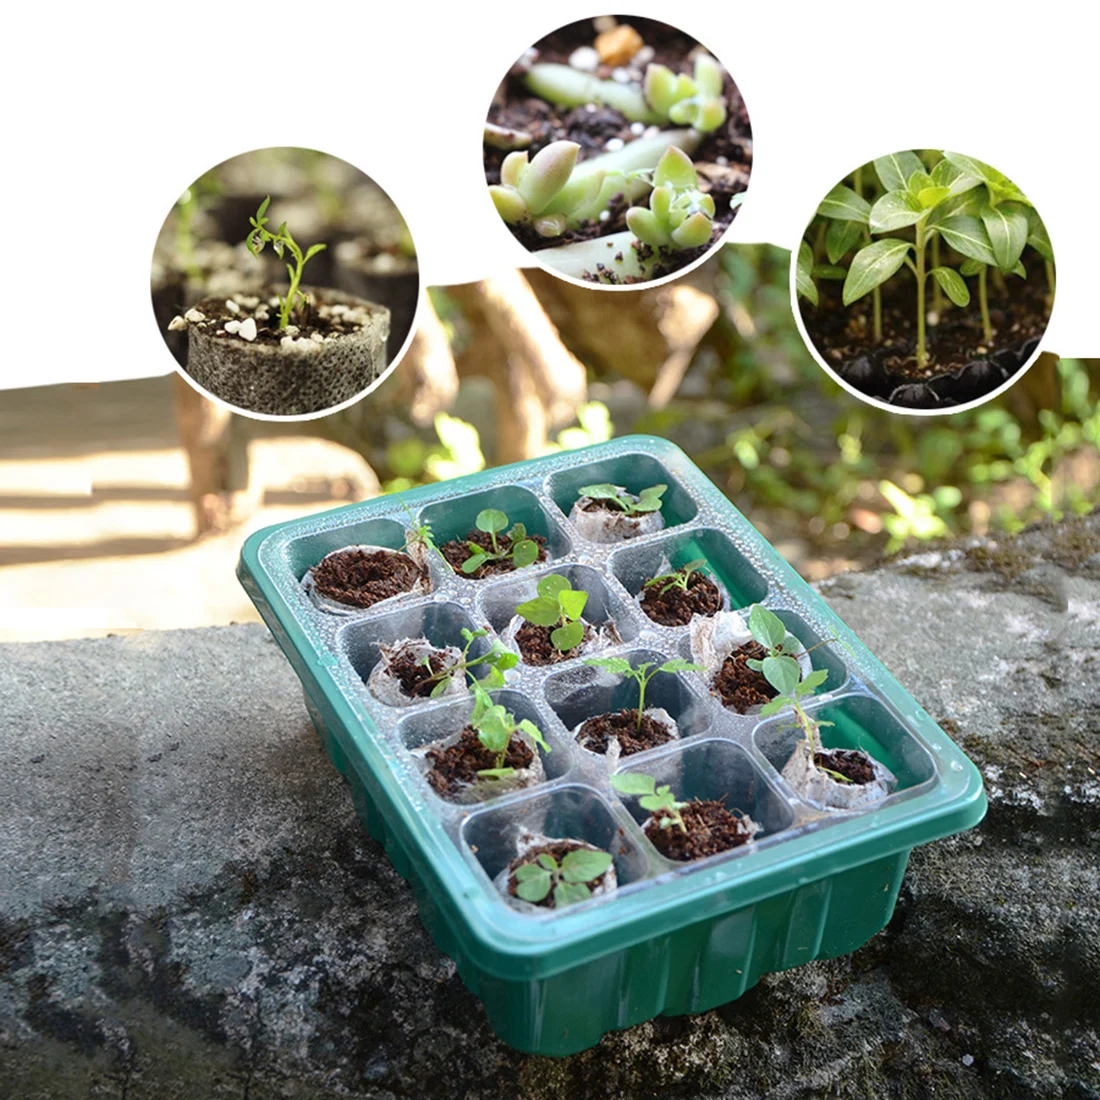 

12 Cells Seed Starter Kit Plant Seeds Grow Box cSeedling Trays Germination Box with Dome and Base for Seeds Growing Starting